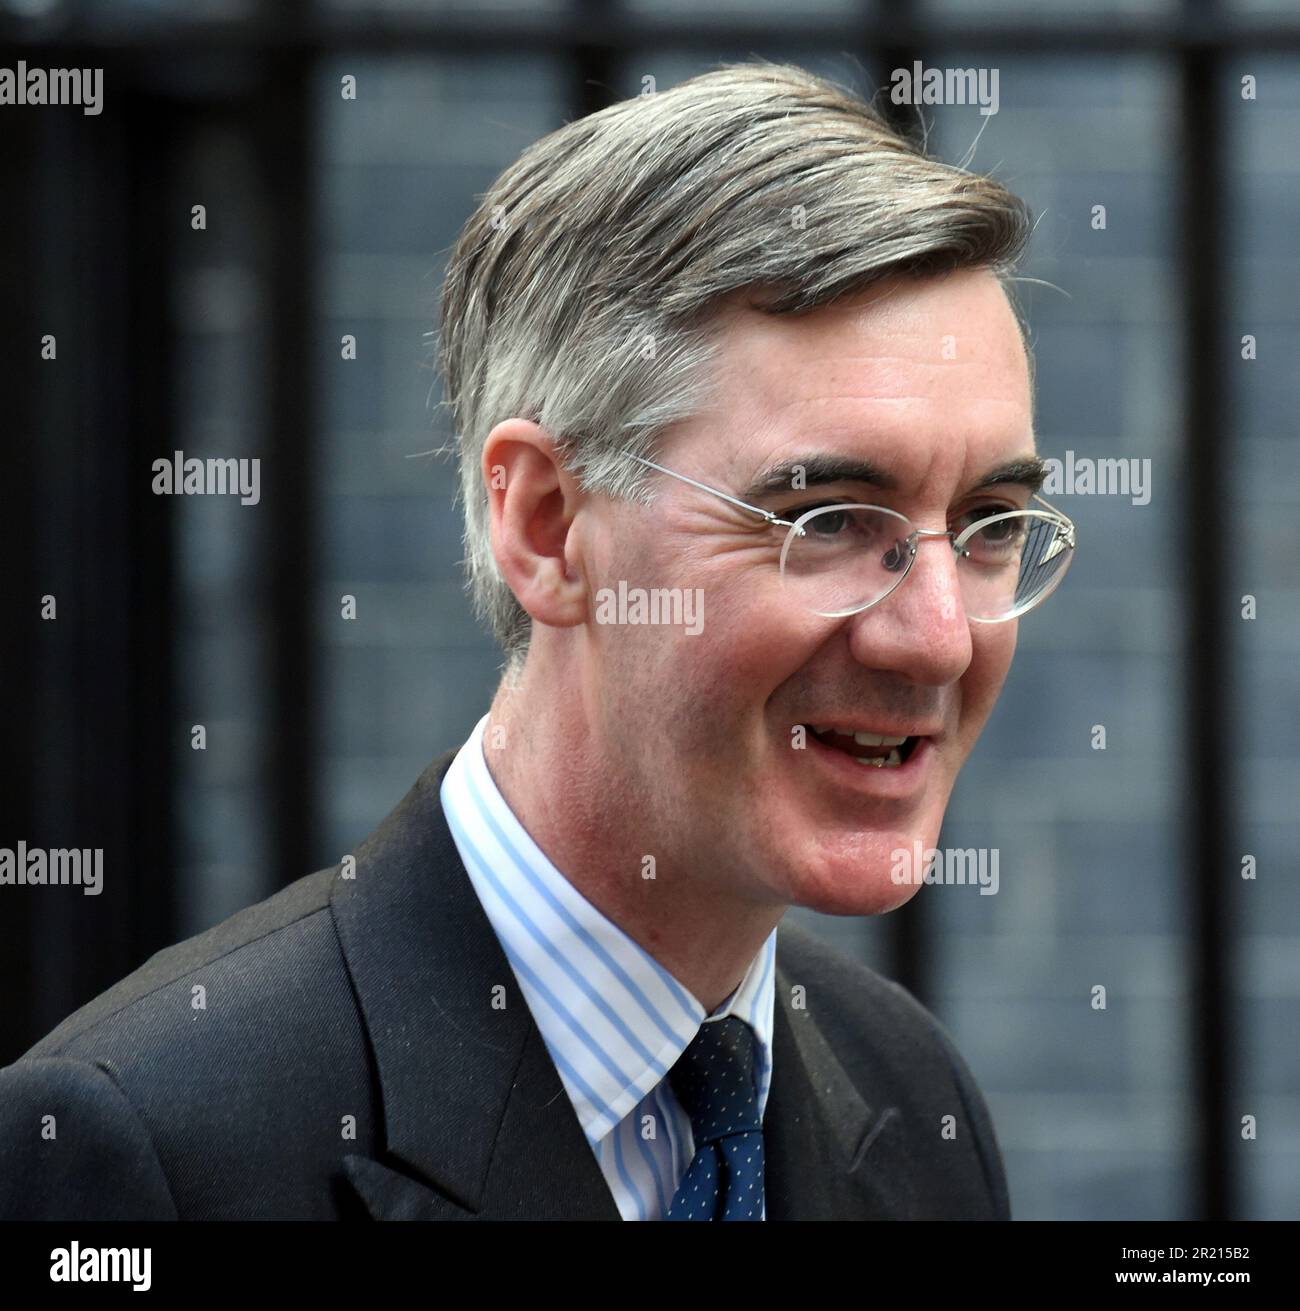 Jacob William Rees-Mogg (born 24 May 1969) is a British politician serving as the Member of Parliament (MP) for North East Somerset since 2010. Now a backbencher, he served as Leader of the House of Commons and Lord President of the Council from 2019 to 2022, Minister of State for Brexit Opportunities and Government Efficiency from February to September 2022 and Secretary of State for Business, Energy and Industrial Strategy from September to October 2022. A member of the Conservative Party, Stock Photo